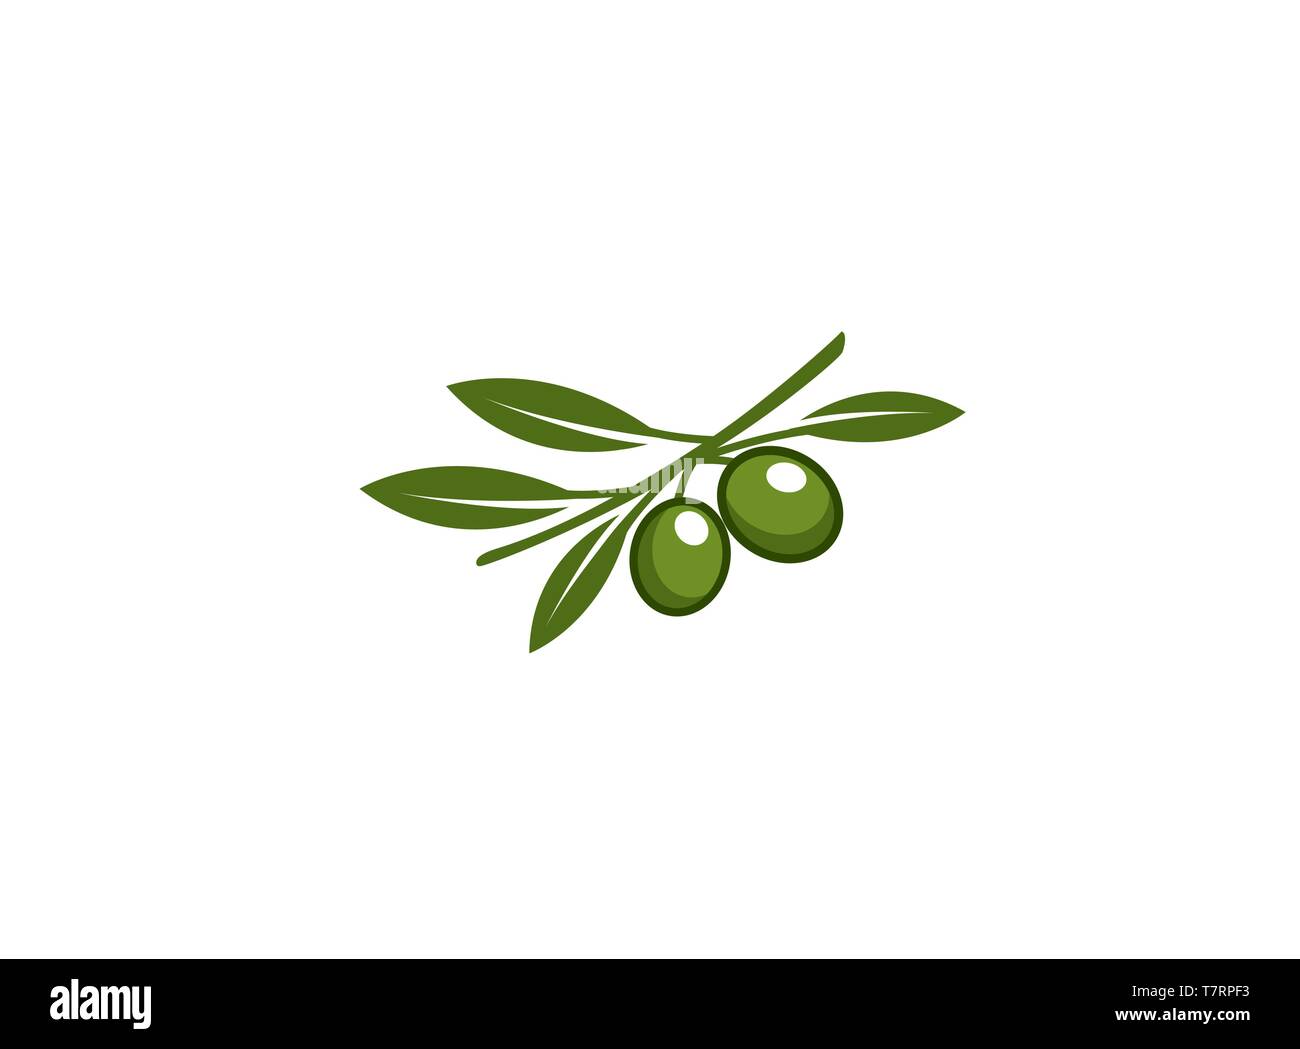 Branch of olive with olive and green leaves for logo Stock Vector